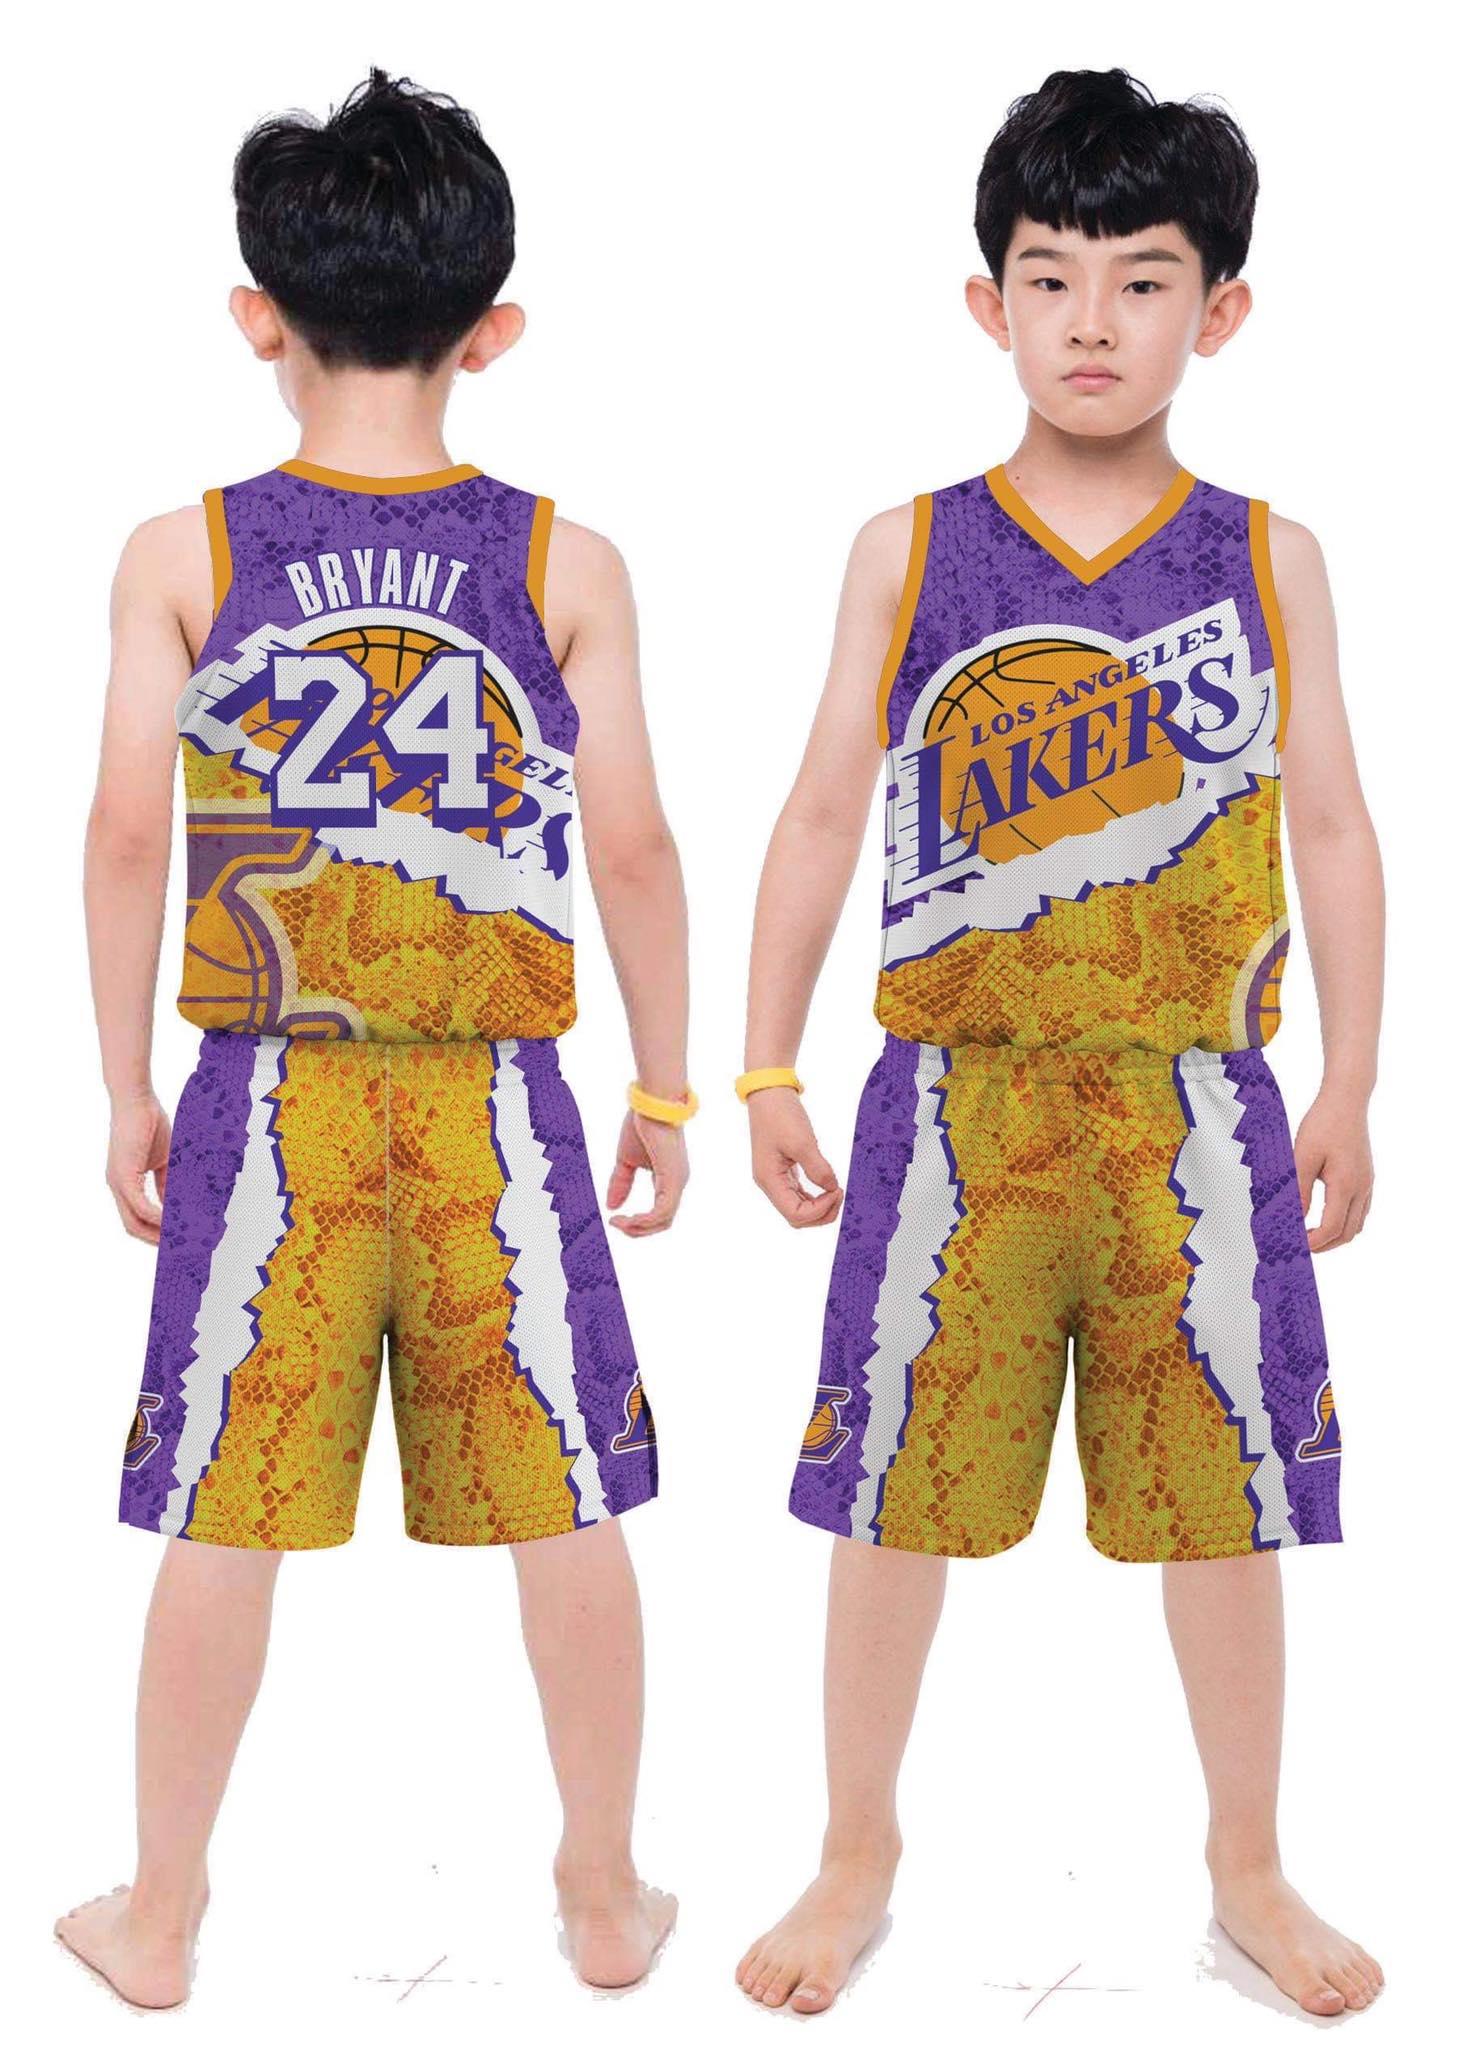 KIDS TERNO EDITION LAKERS 03 PURPLE LEBRON JAMES JERSEY NAME & NUMBER  CUSTOMIZED full sublimation high quality spandex up & down basketball jersey